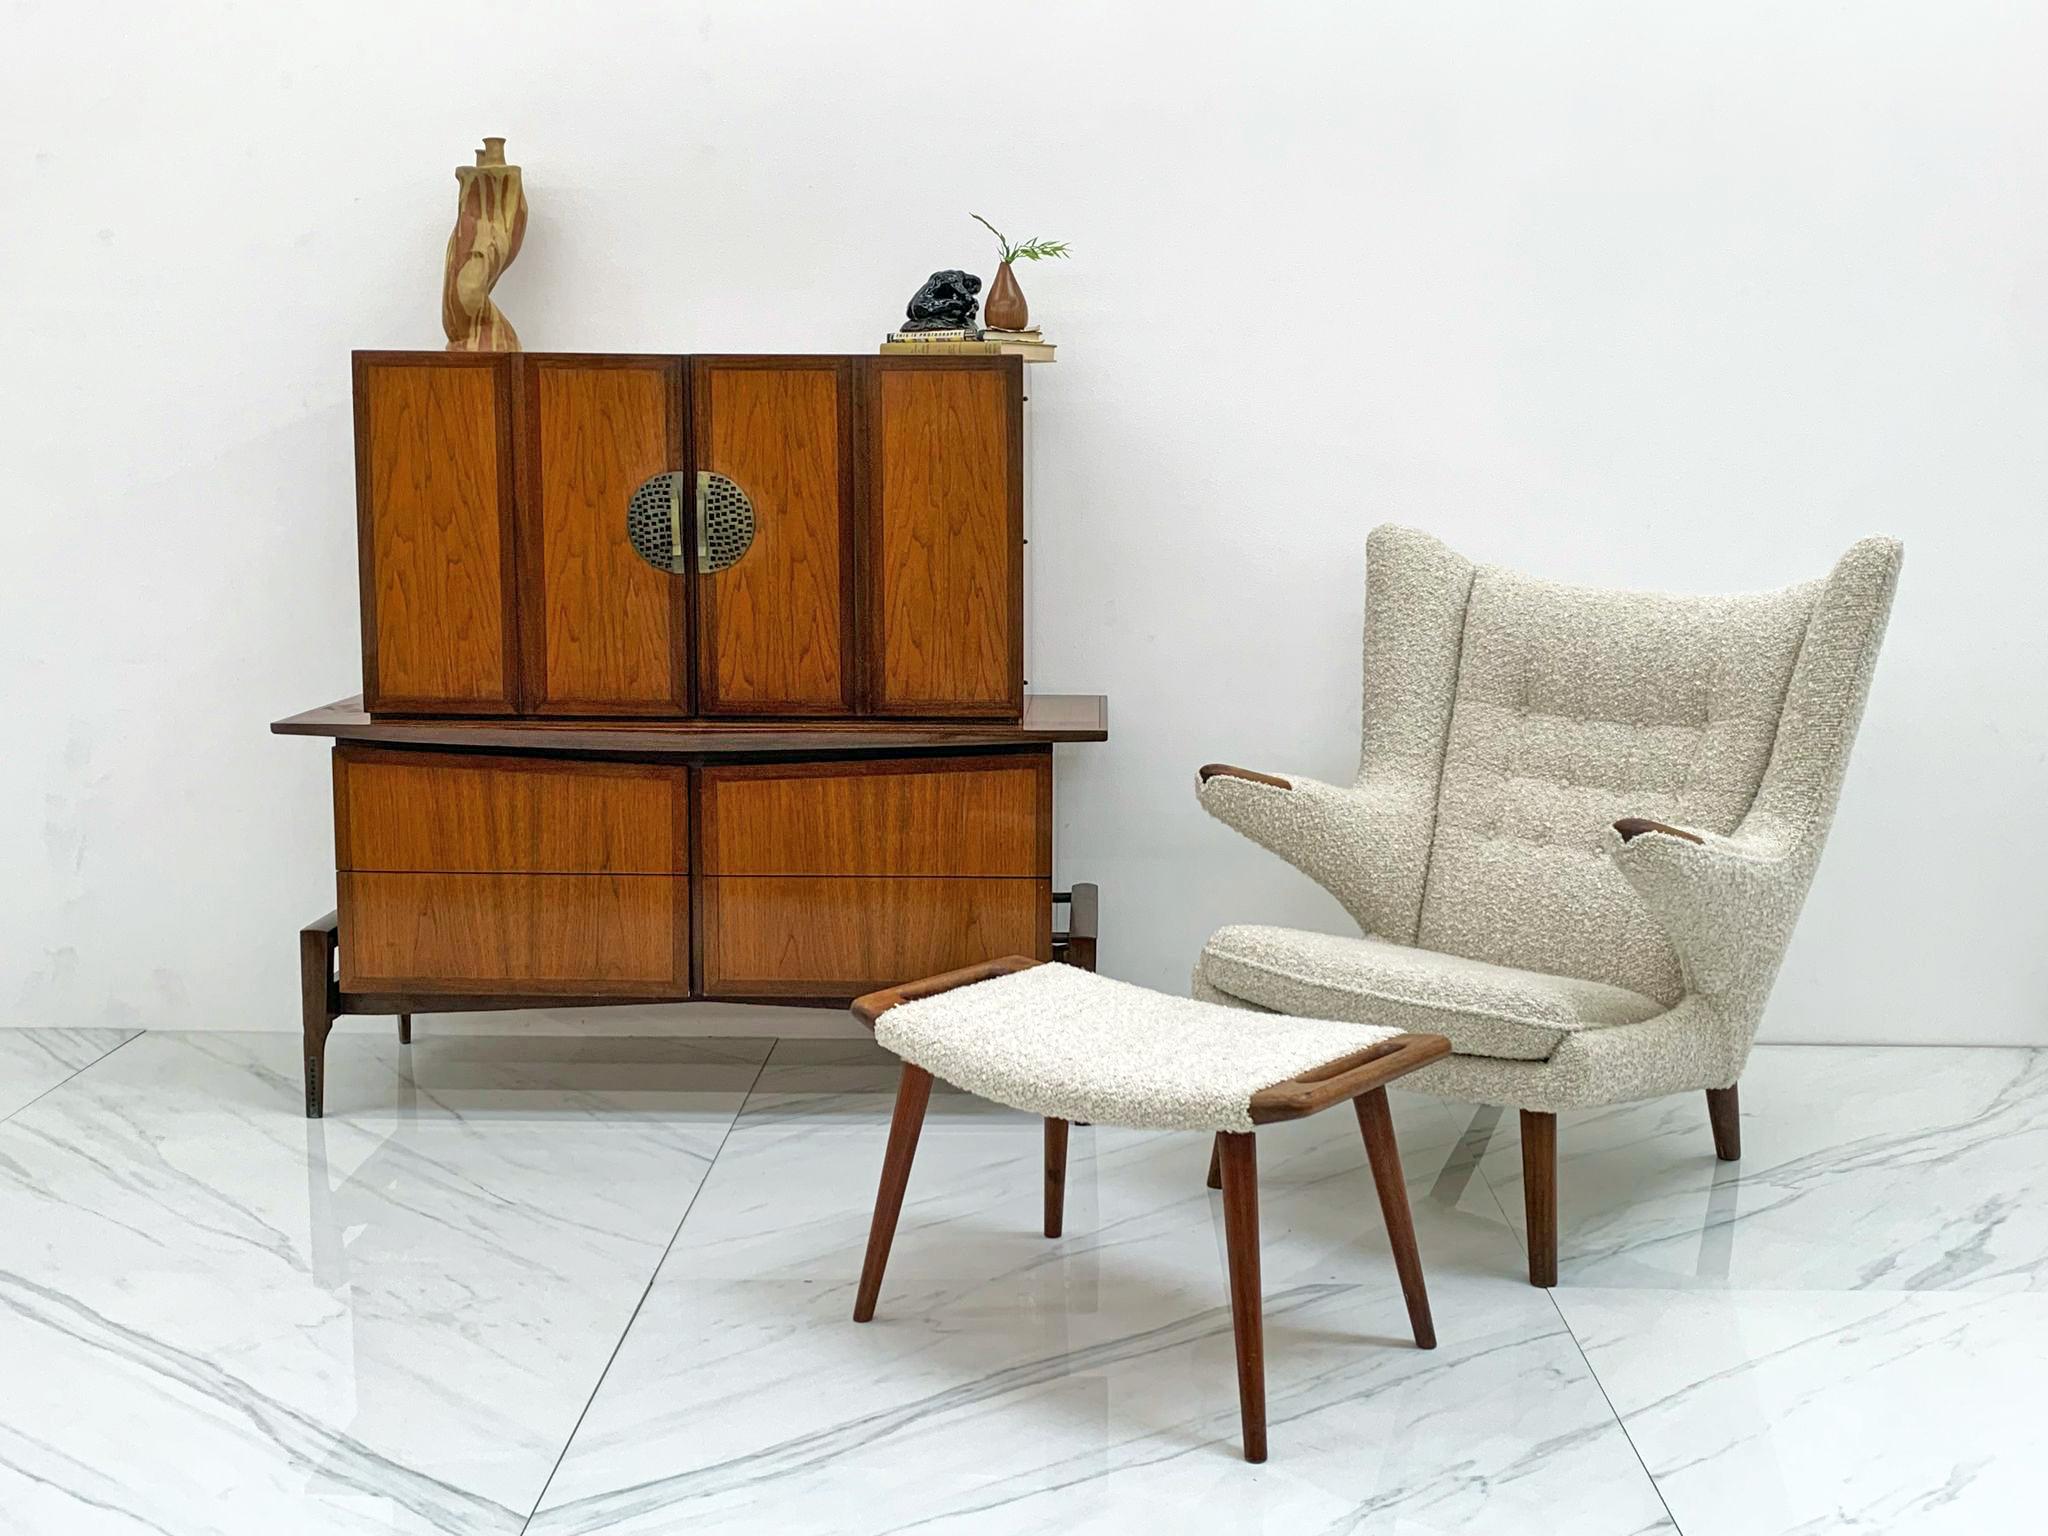 This gorgeous walnut 2 piece chest on chest was designed by Helen & Hobey Baker in the 1950's. This piece has all the fun aspects of a true bold mid century modern piece -- clean, angular swooping lines that give the piece an almost googie look that